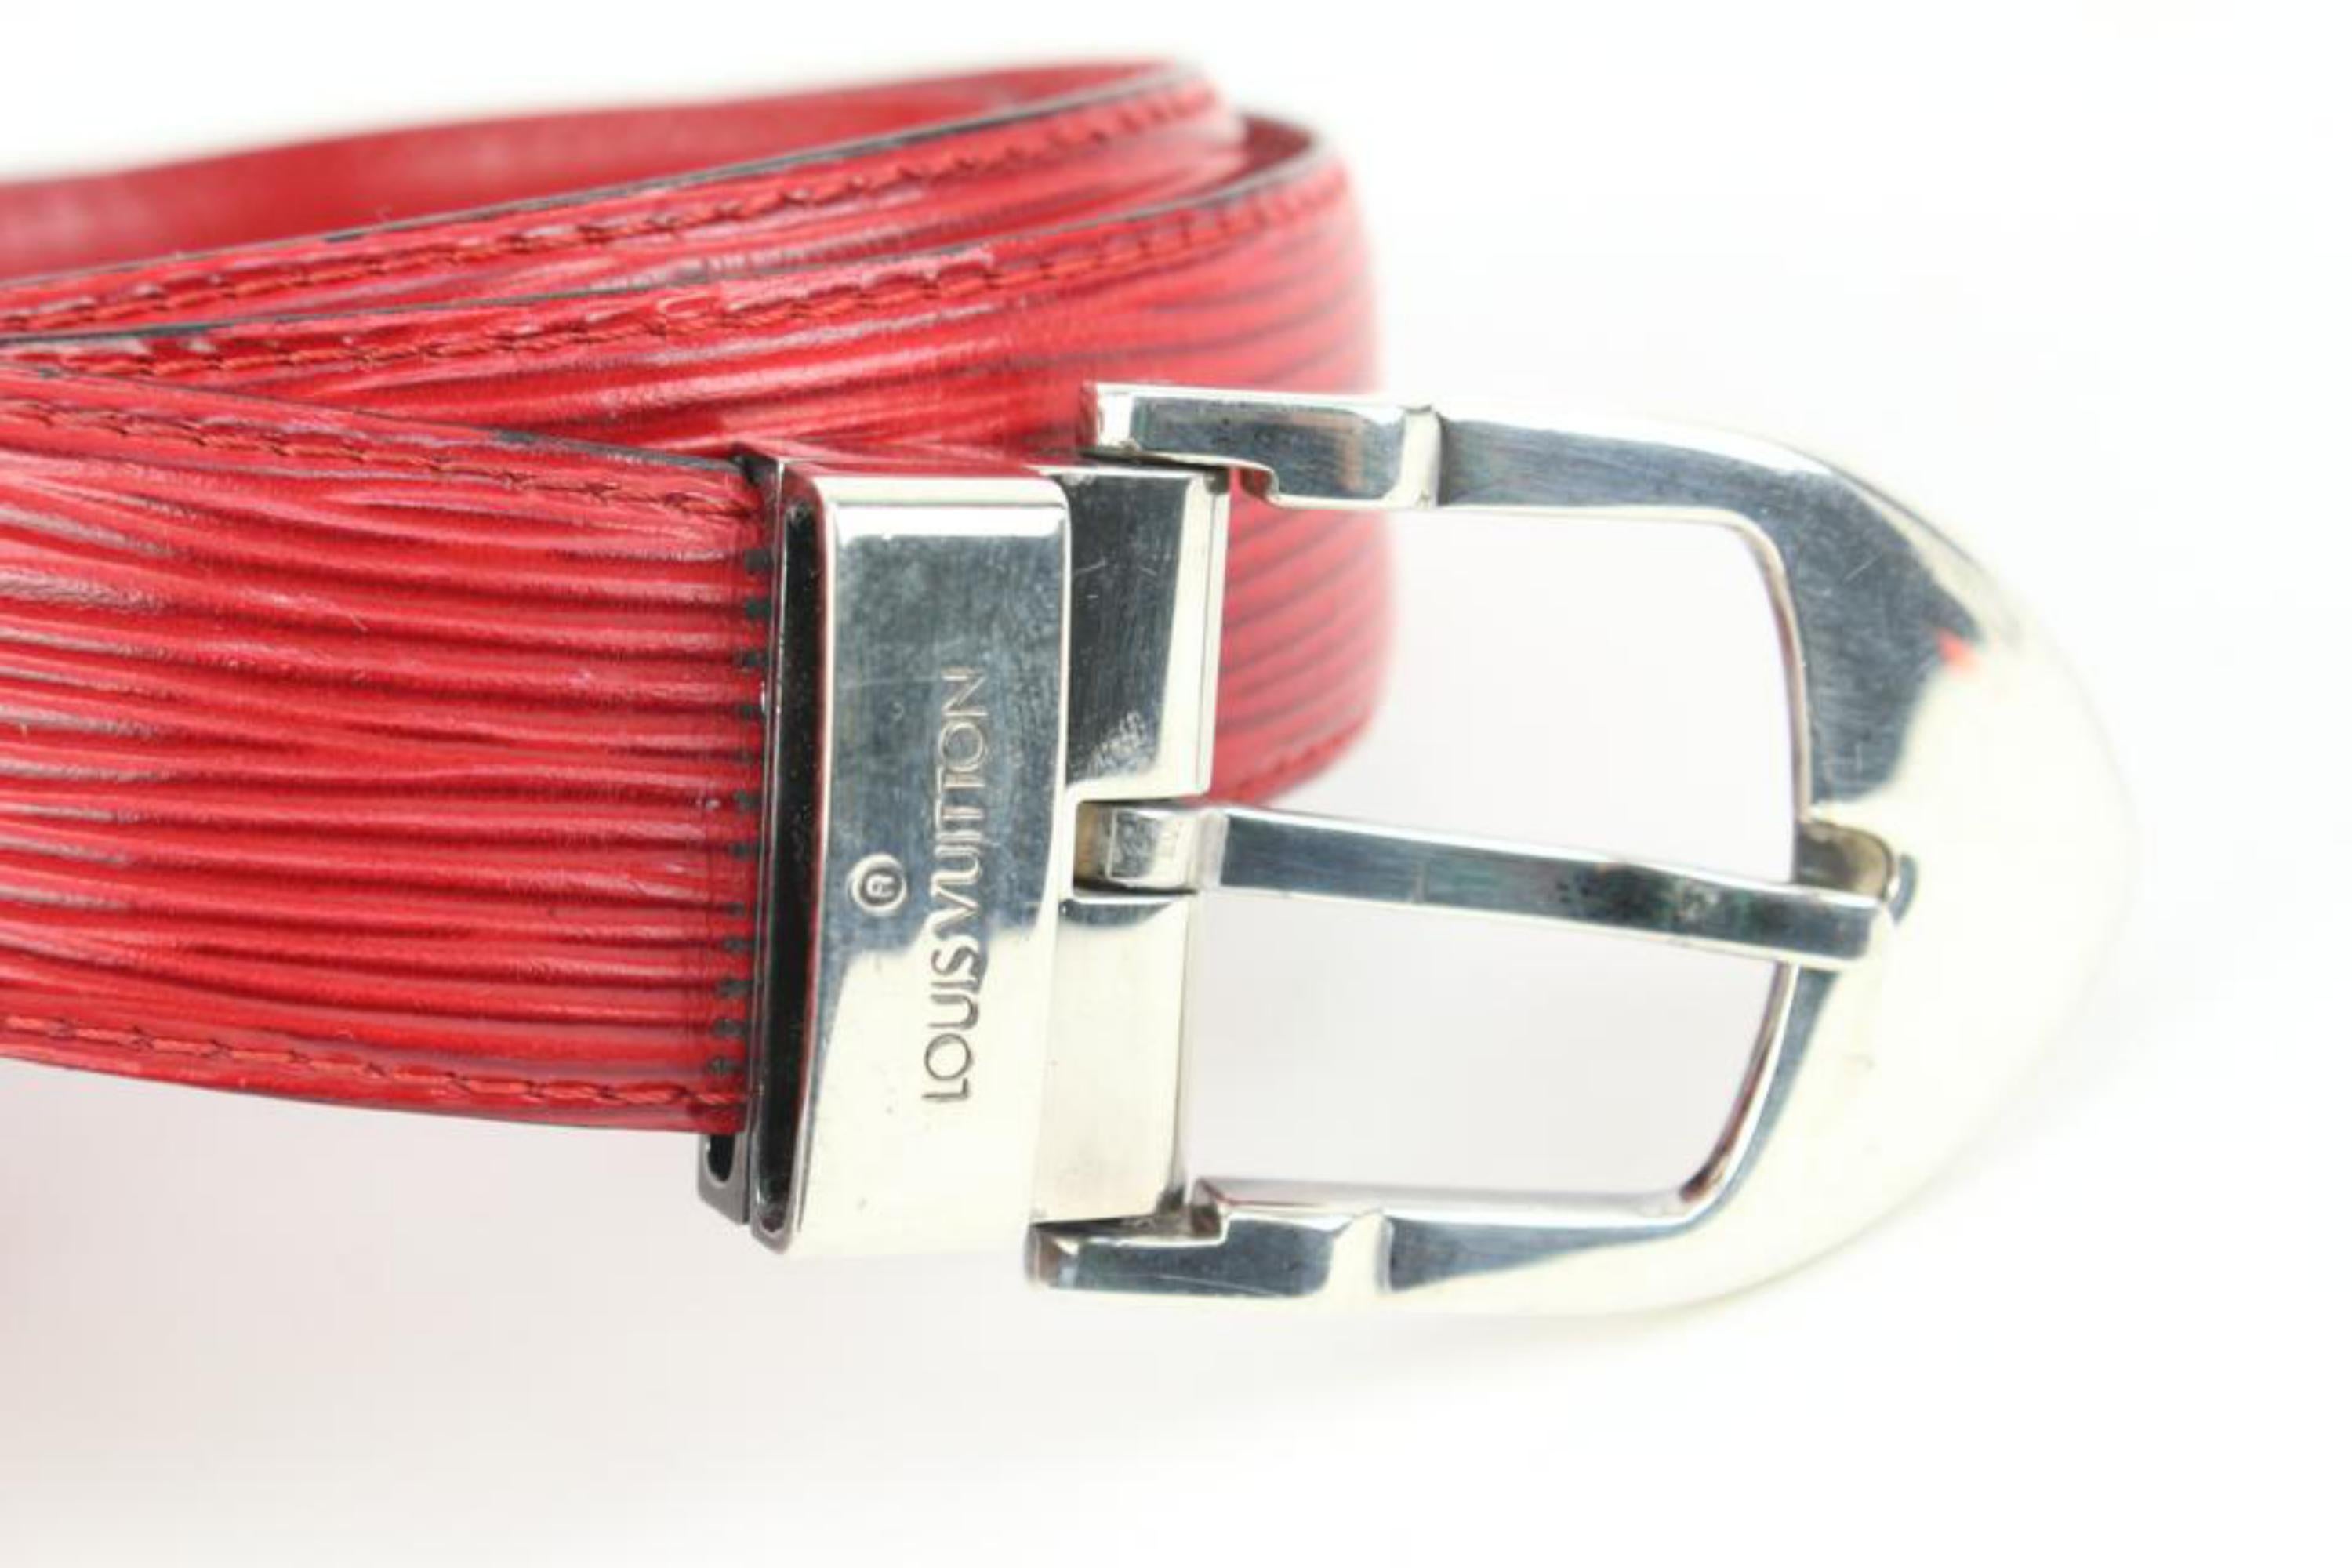 Louis Vuitton 85/34 Red Epi Leather Ceinture Belt Silver Buckle 95lk412s In Good Condition For Sale In Dix hills, NY